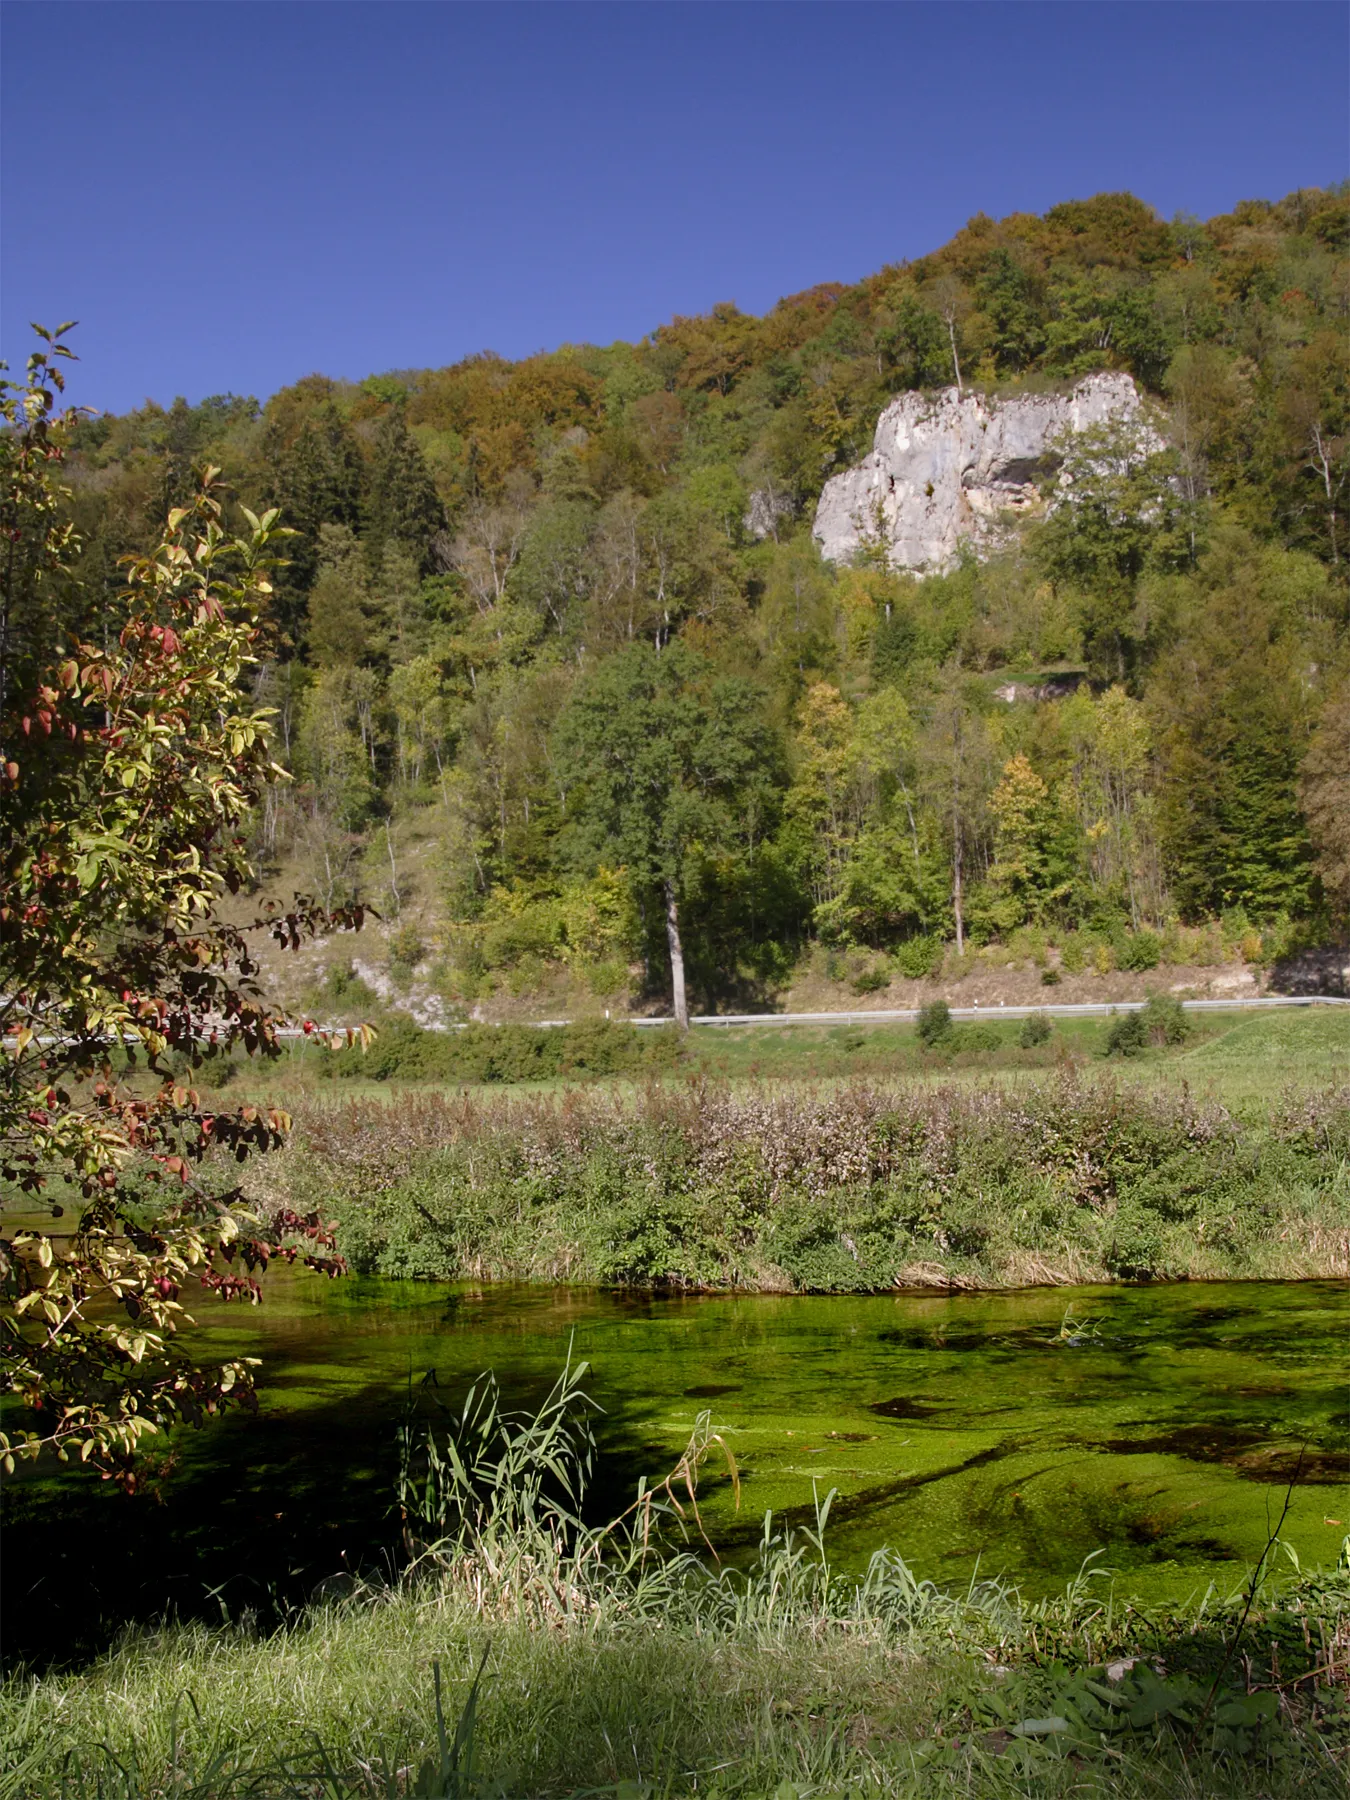 Photo showing: "Kachelfelsen", NNE of Hettingen, Swabian Alb - a mass jurassic rock, well above river Lauchert. The hollow in the hard limestone rock is the result of fluvial erosion of a much earlier stage of the river. The water is rich in fish, but kind of eutrophic.